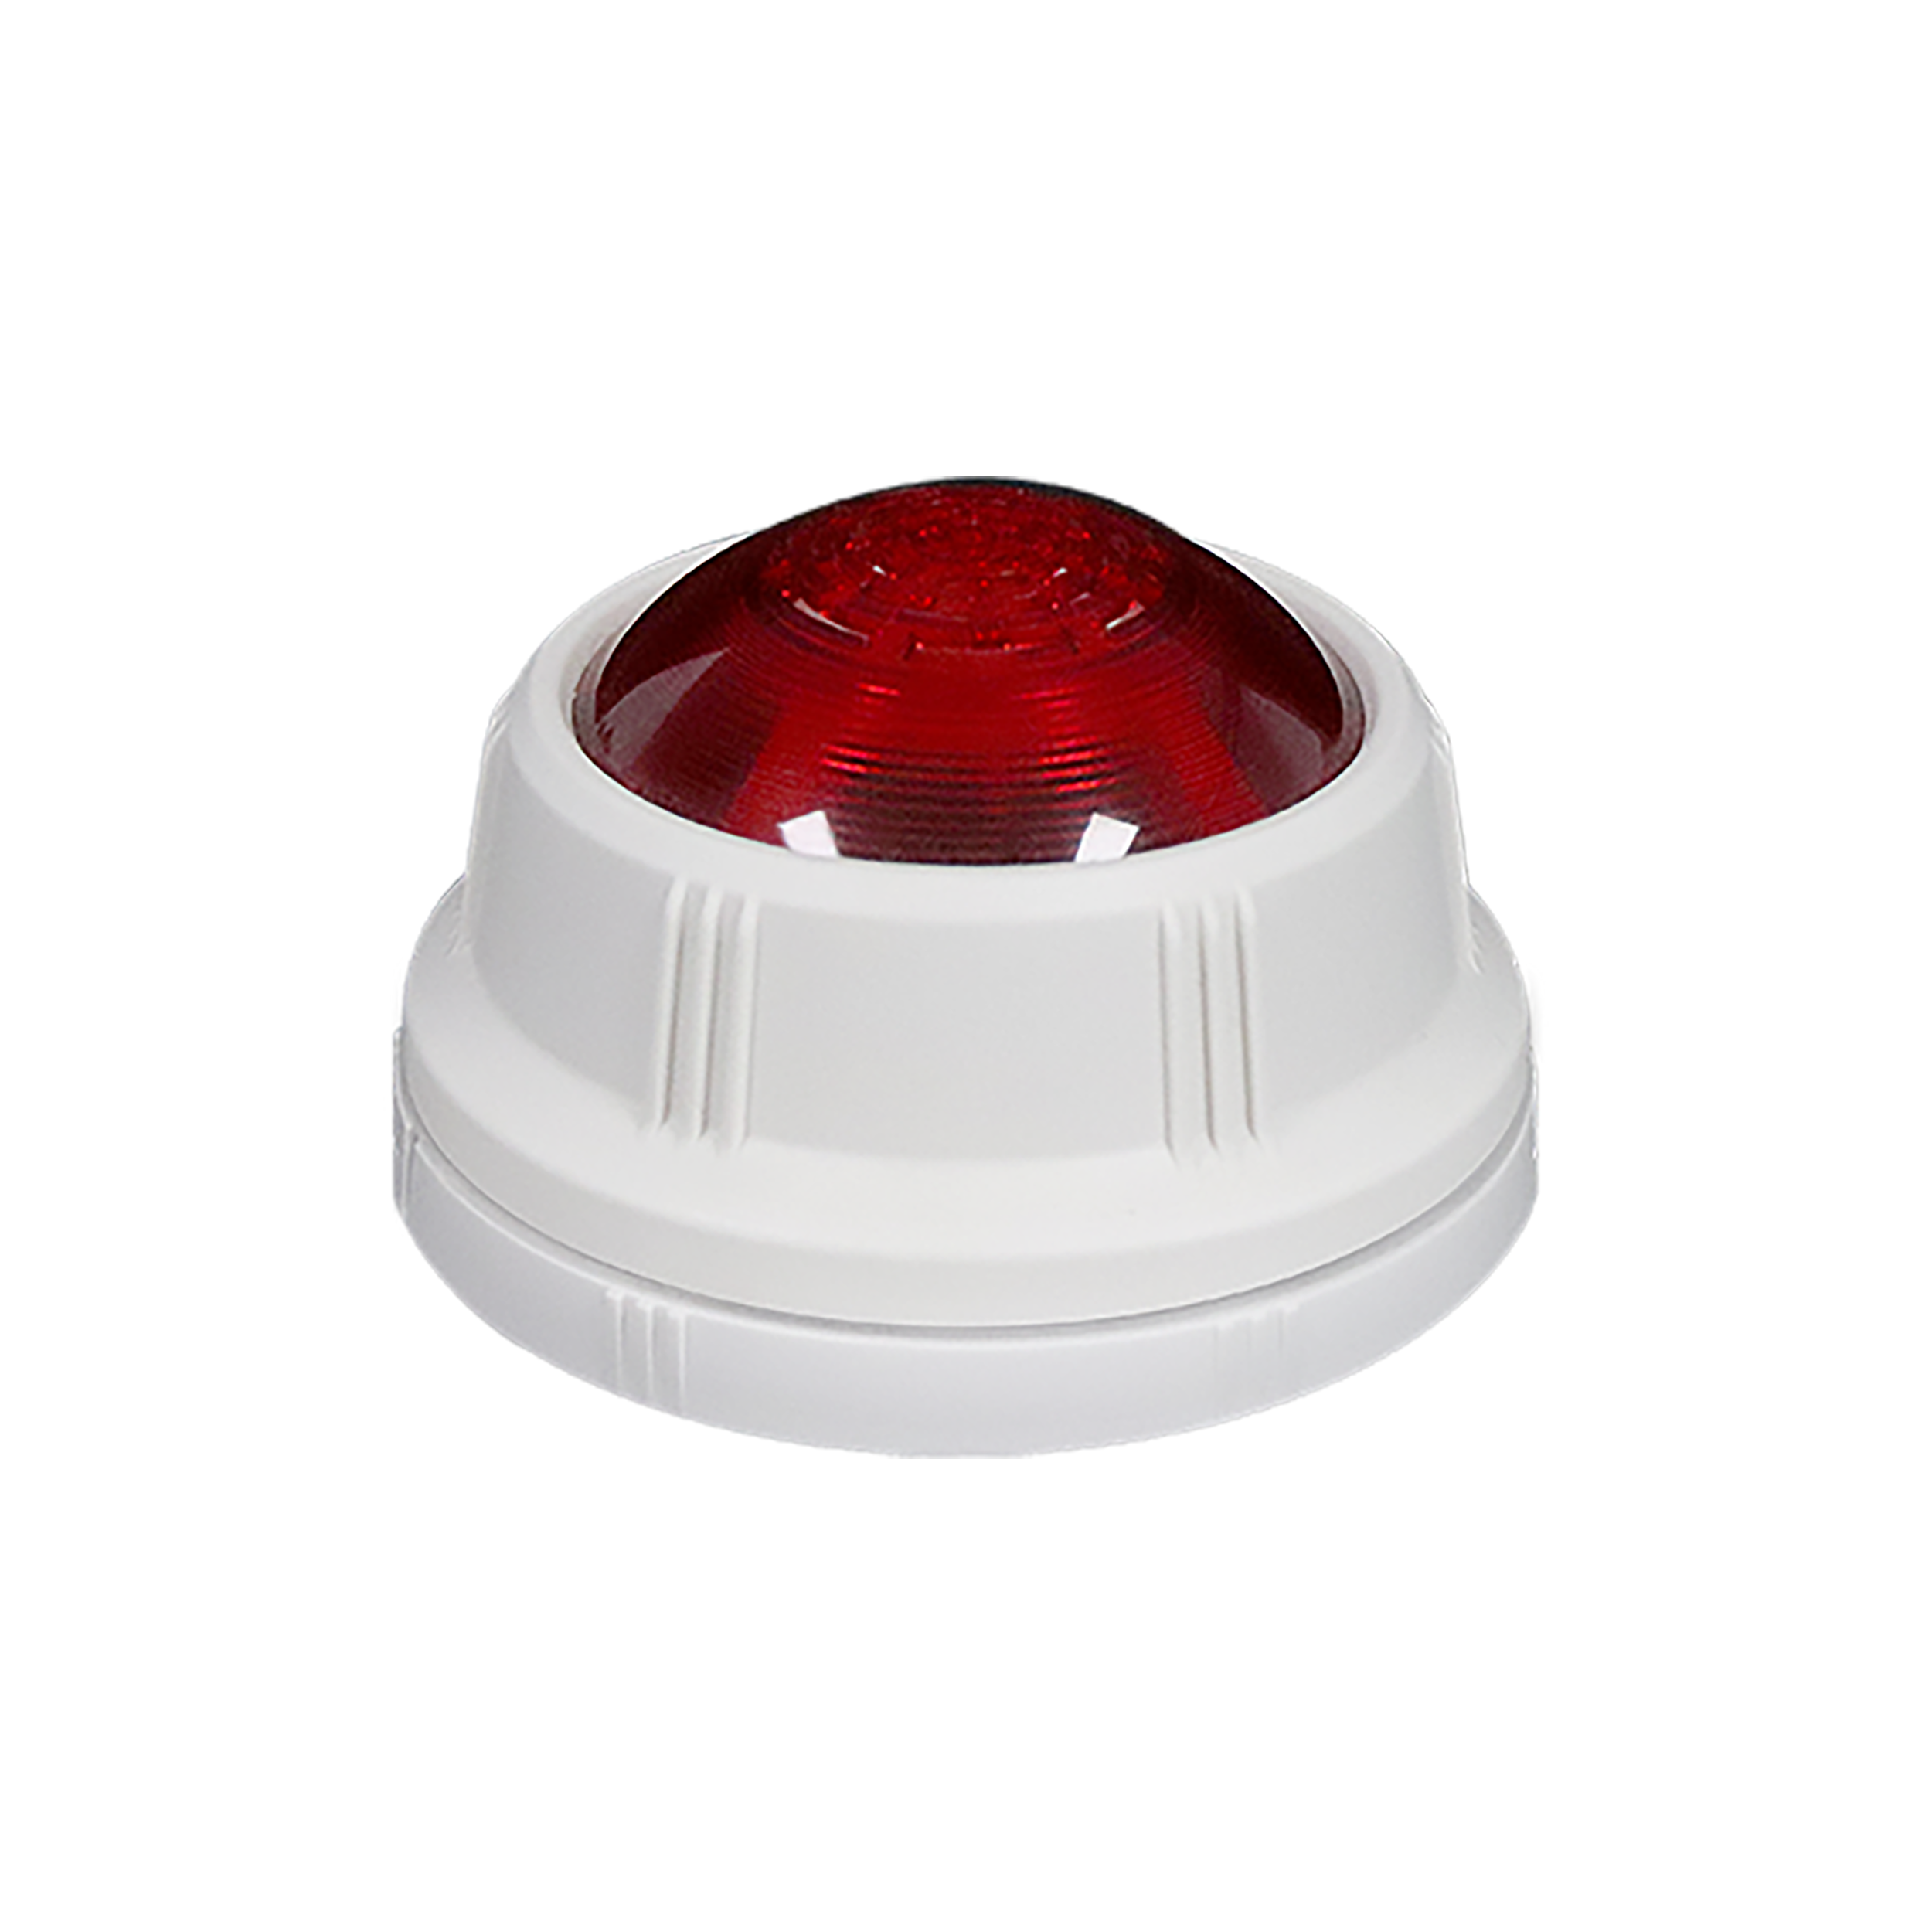 JBF1373 Effective Fire Sound and Light Alarm | Enhance Safety and Awareness